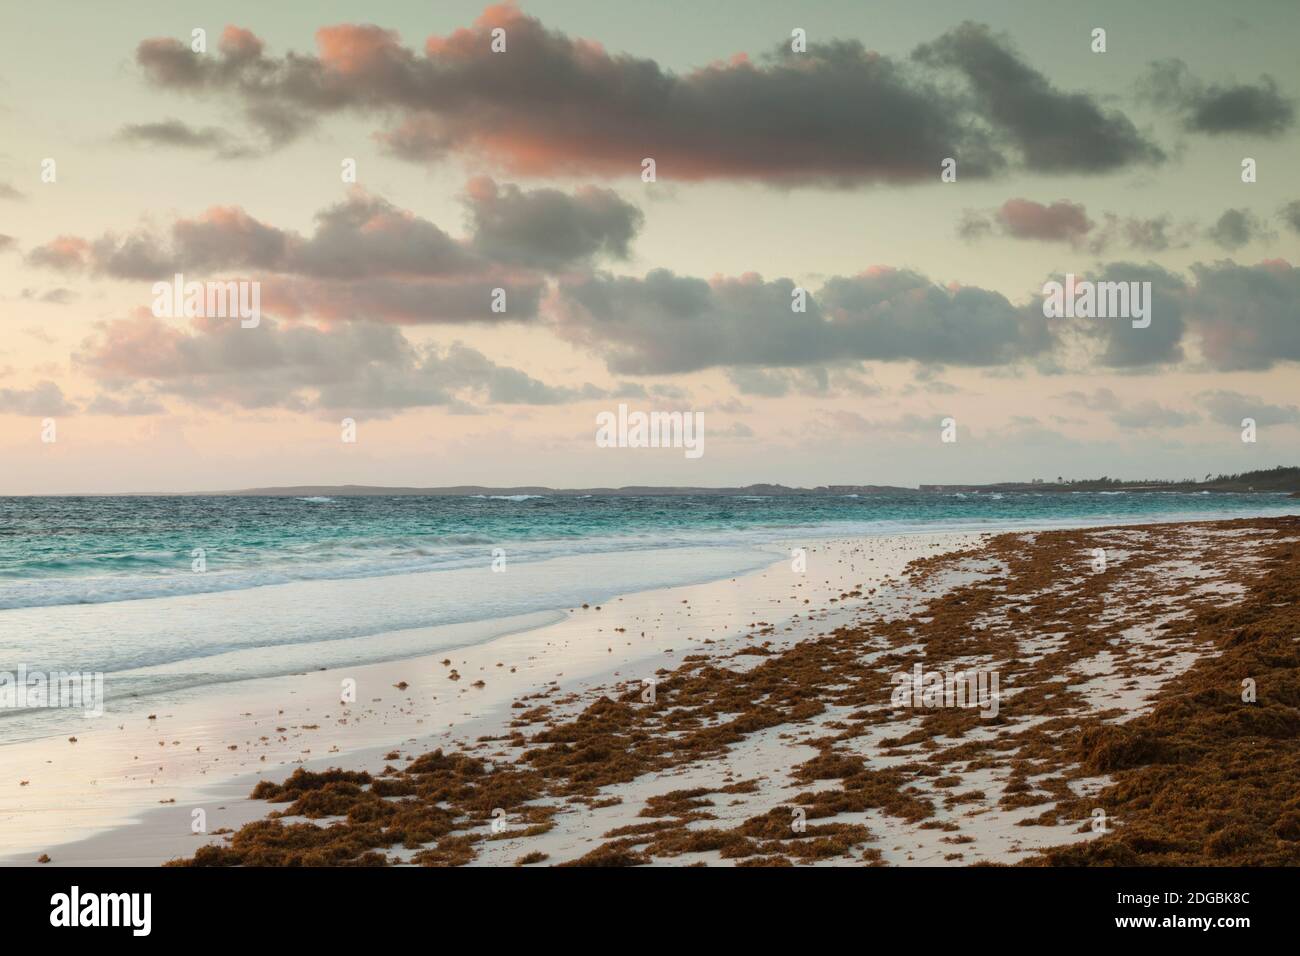 Elevated view of Pink Sands Beach, Dunmore Town, Harbour Island, Eleuthera Island, Bahamas Stock Photo